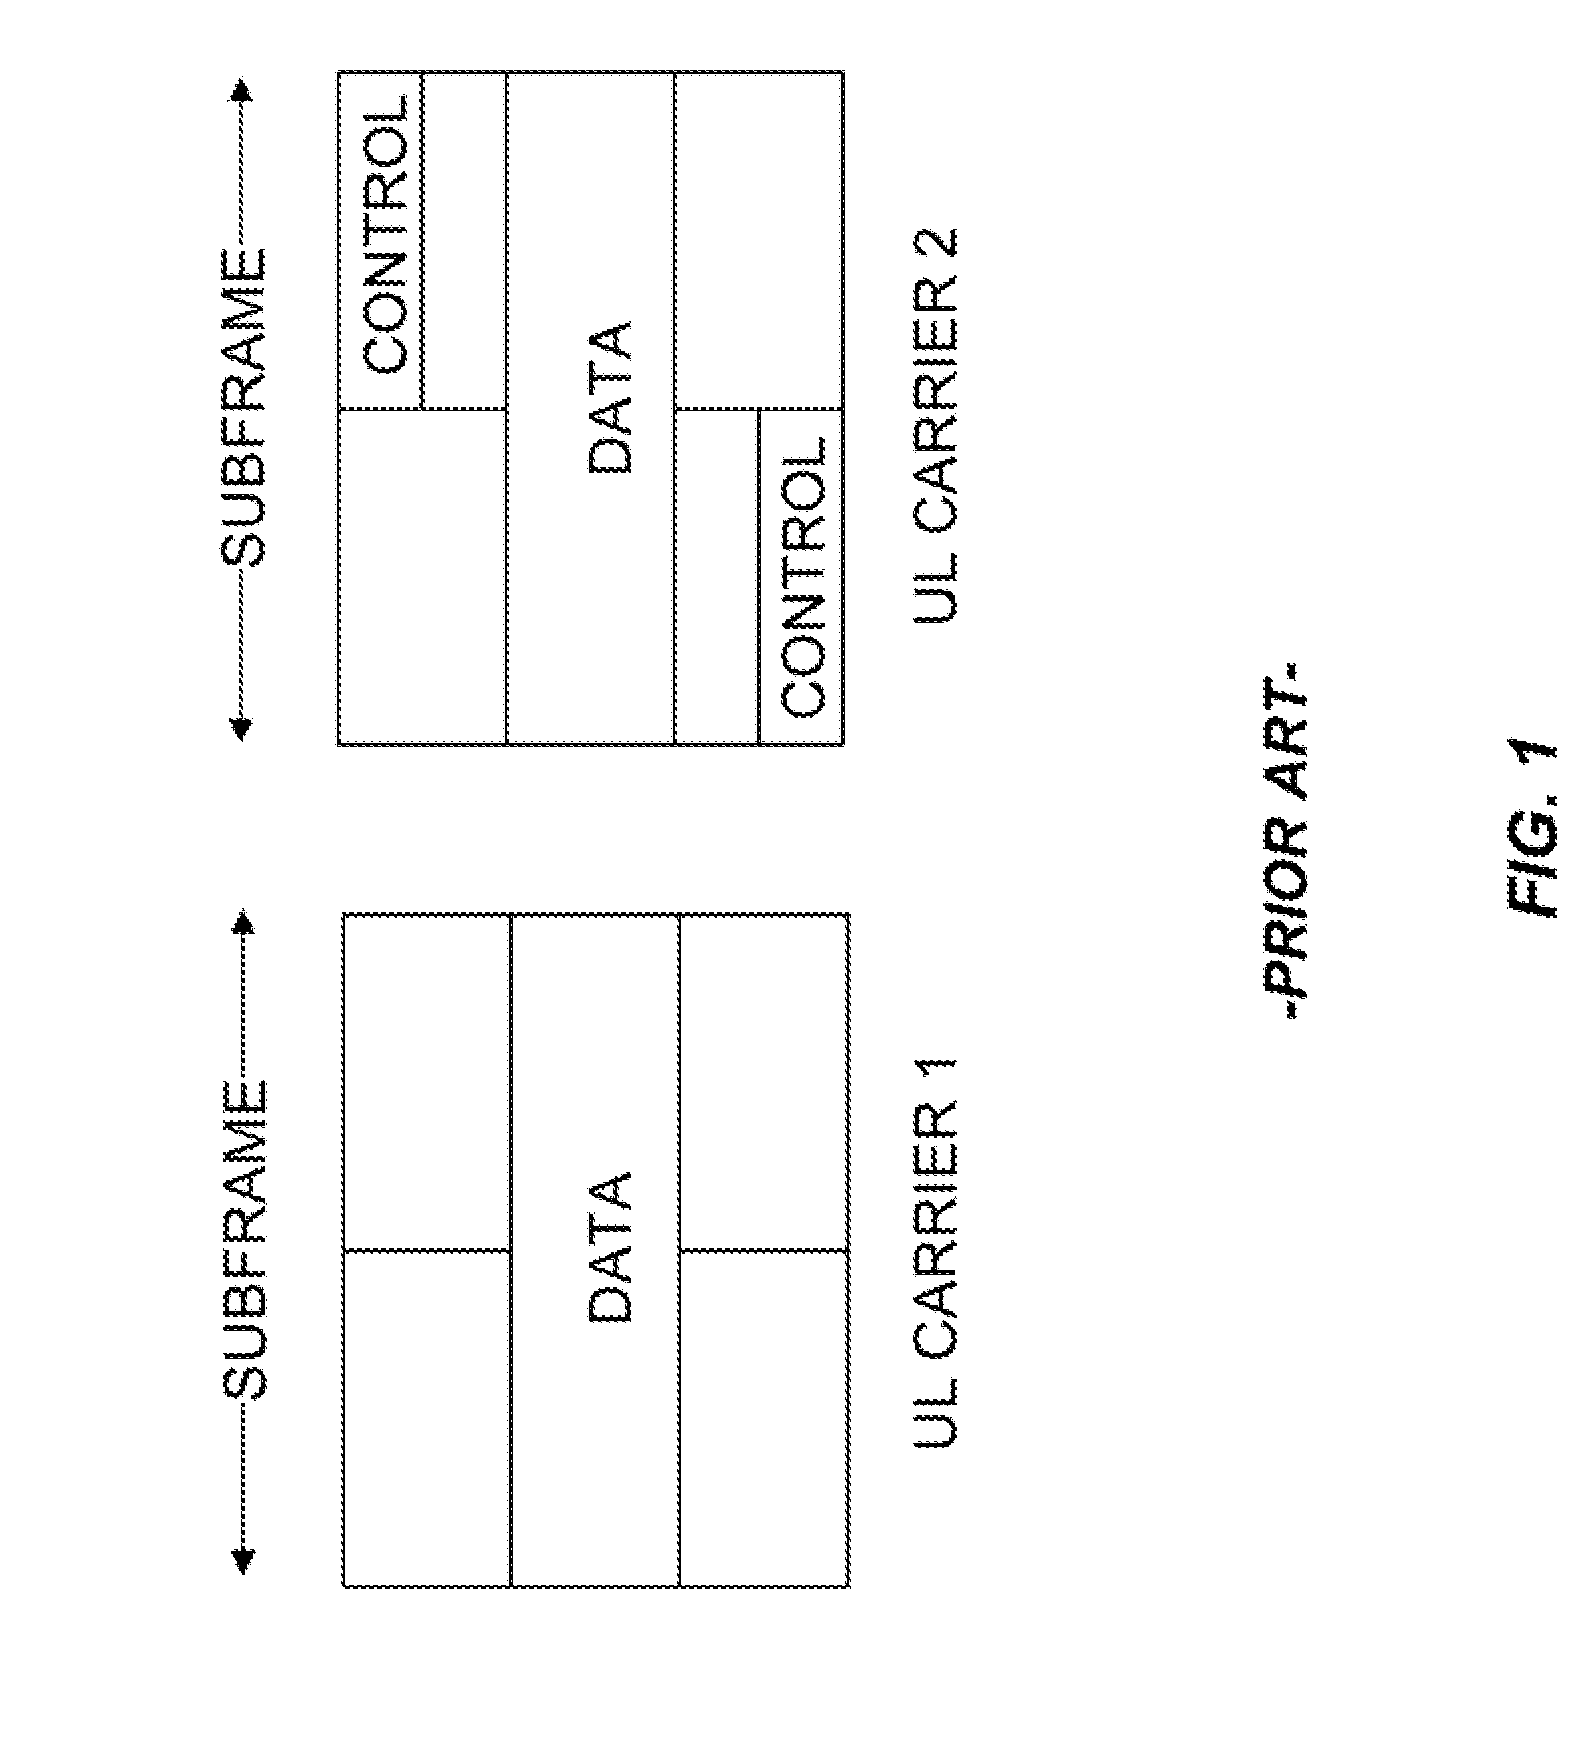 Uplink power control for channel aggregation in a communication network